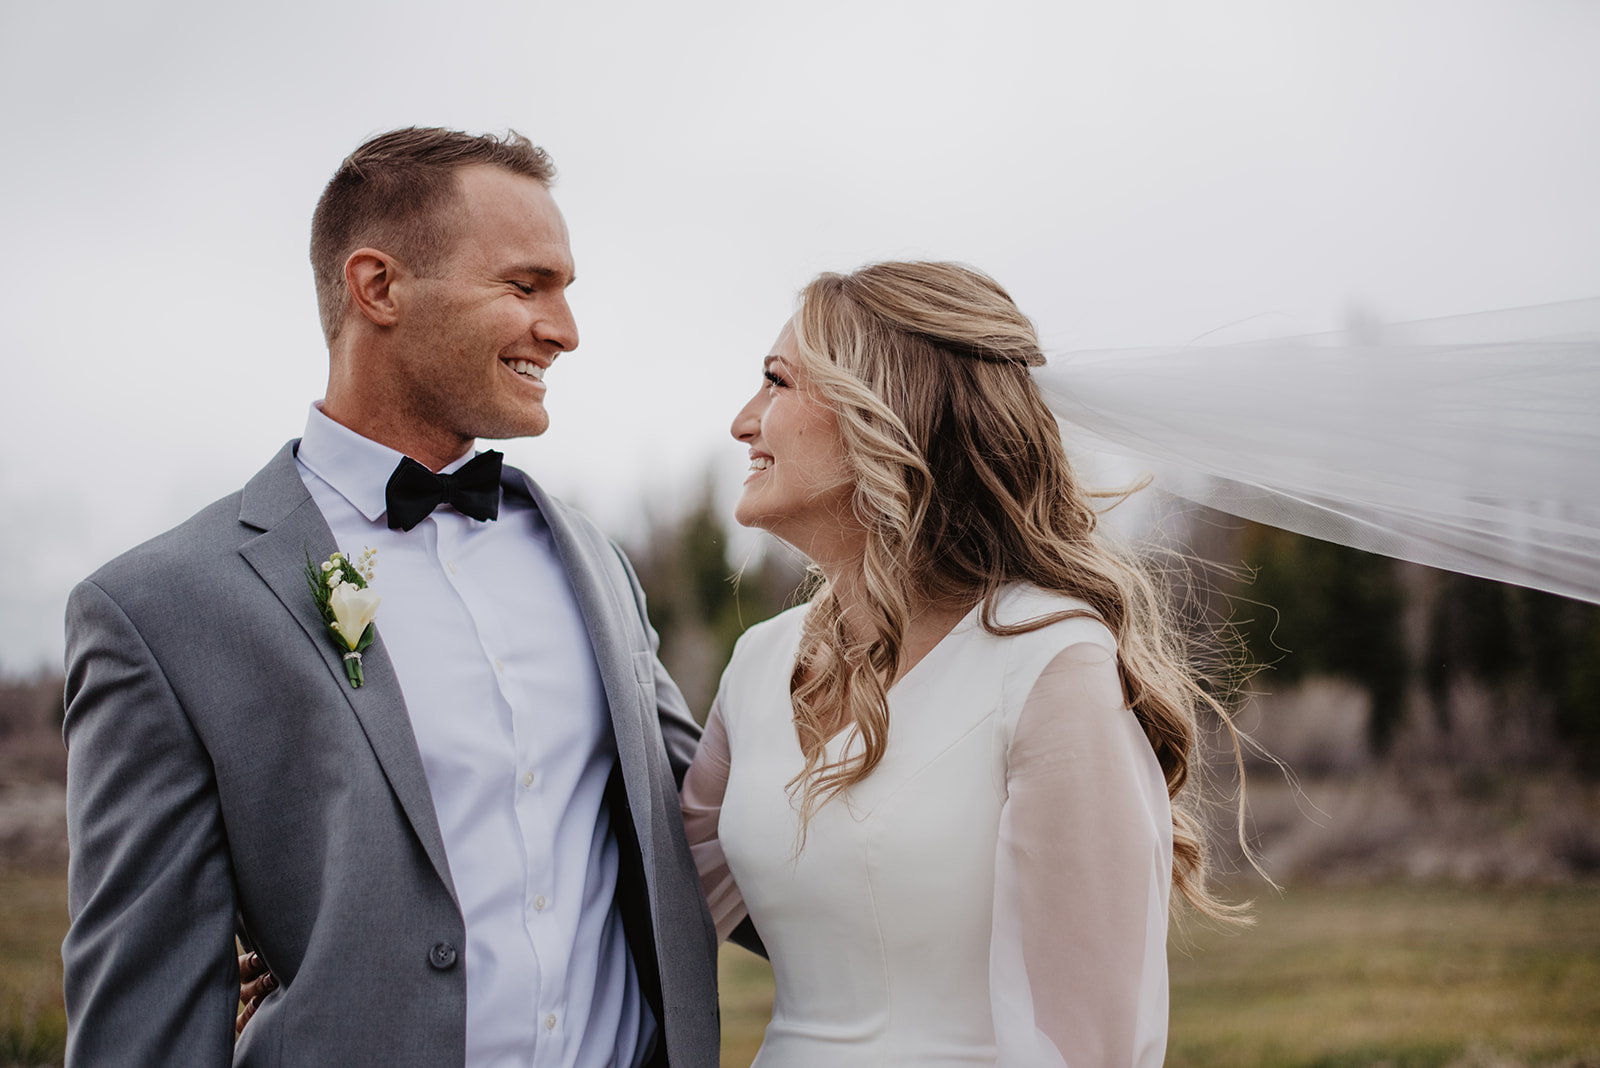 bride and groom on a foggy day in the Tetons celebrating their wedding while wearing a traditional long sleeve gown and a blue suit with a bow tie holding hands and smiling at one another